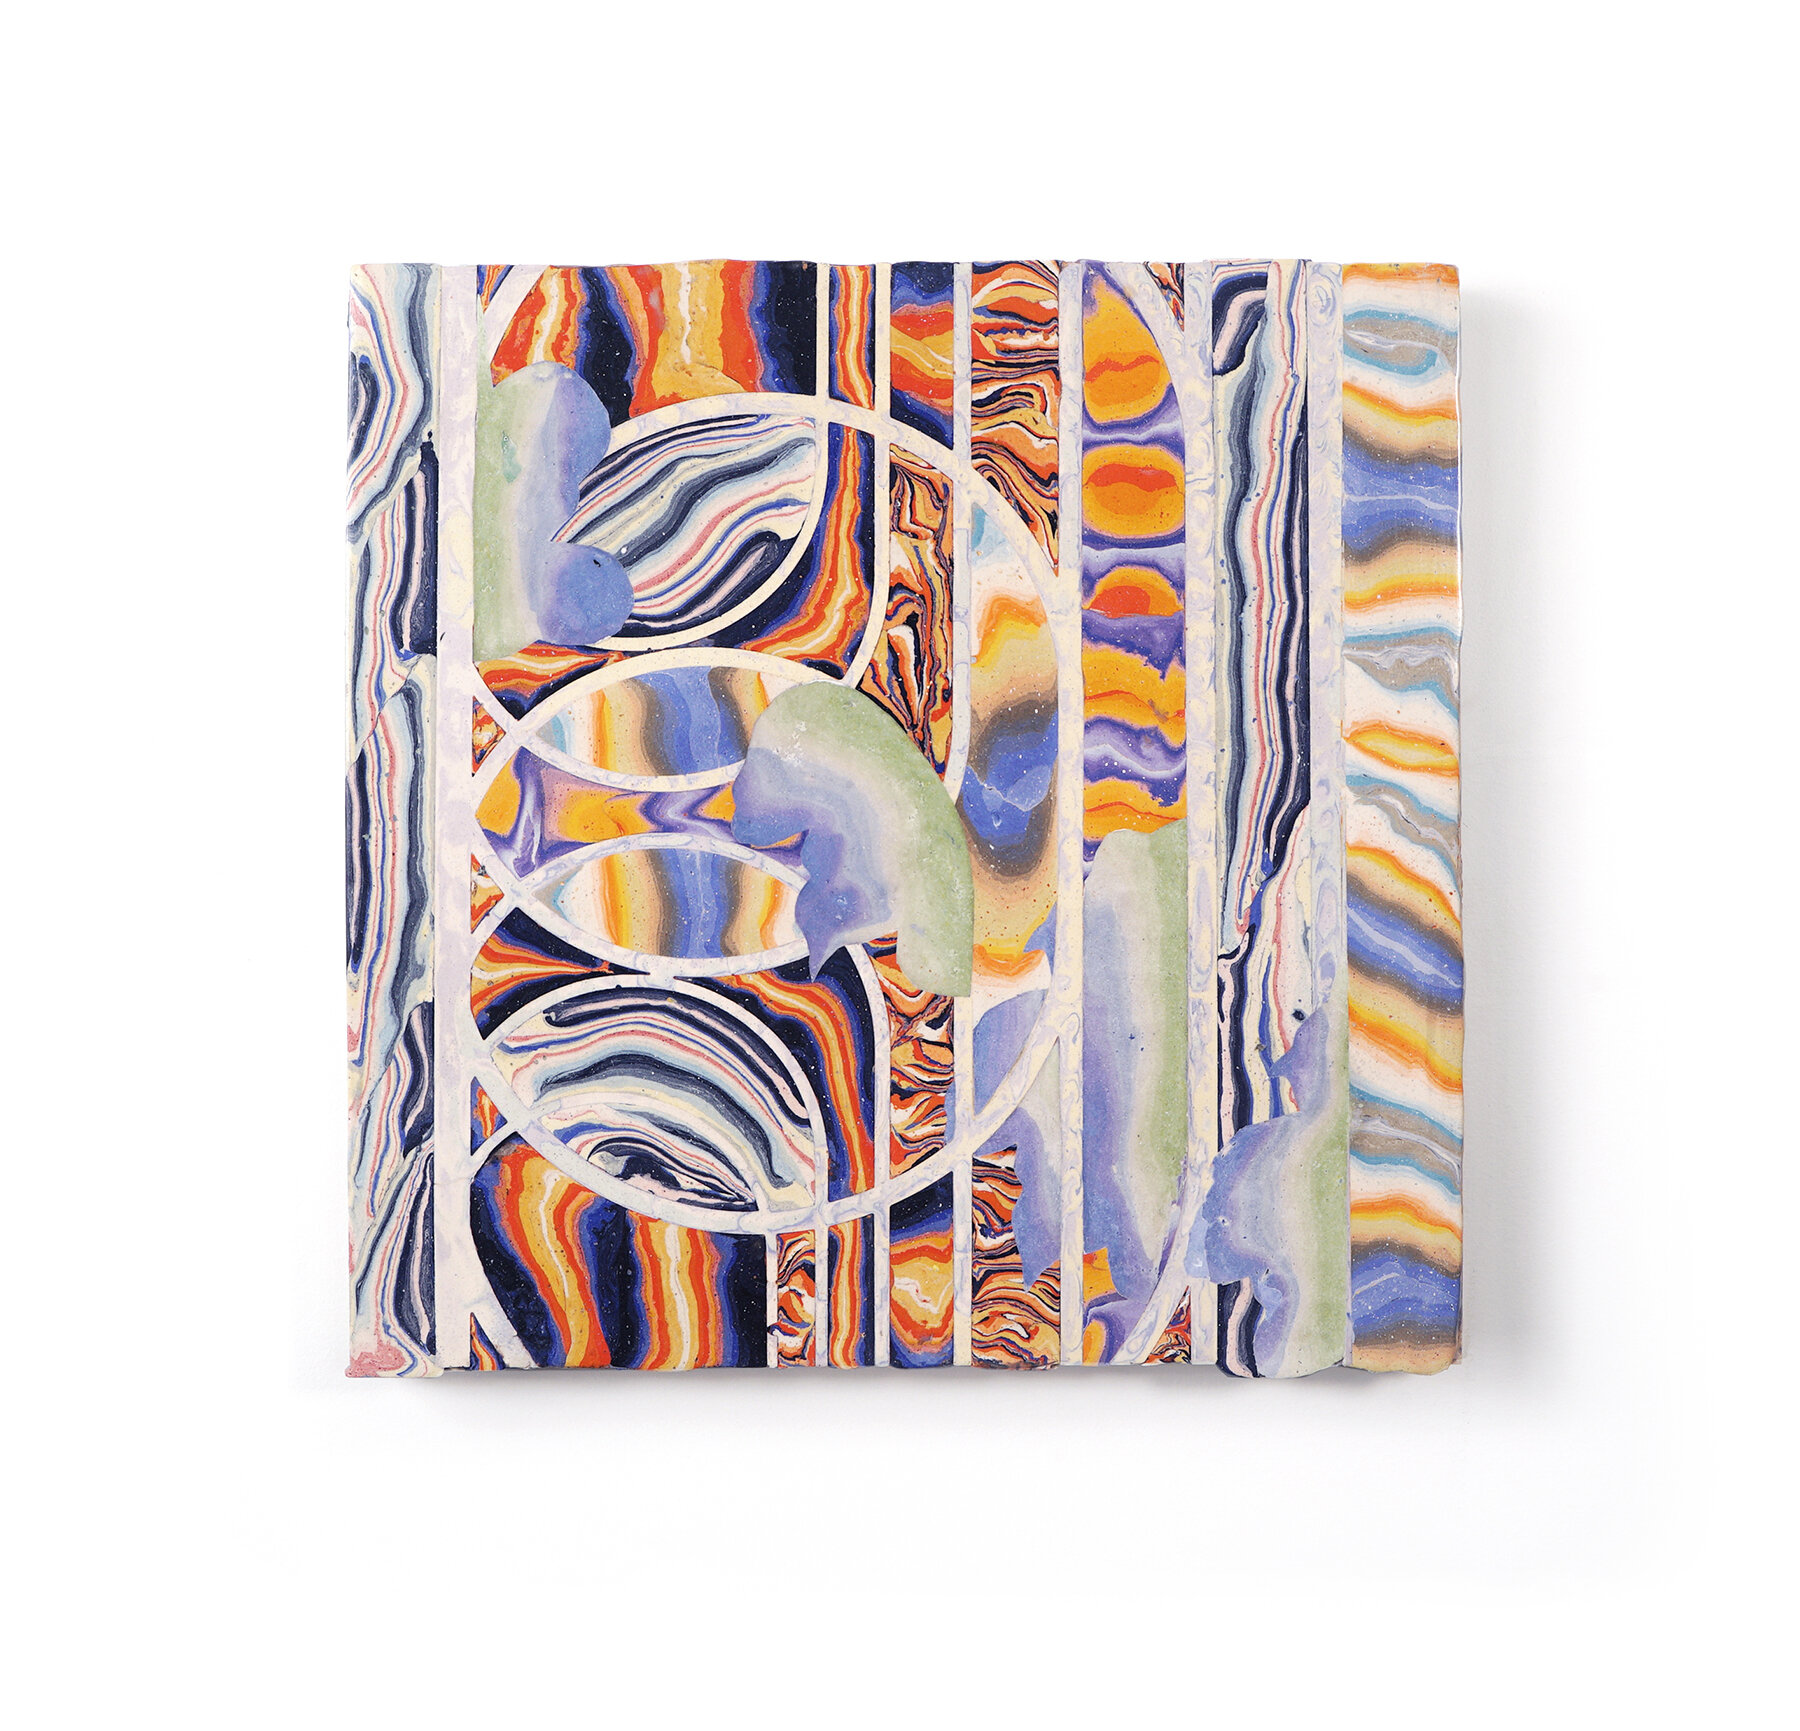   Harmony Surrounds a Pause    Pigmented plaster, scagliola inlay 12 1⁄4 x 12 1⁄4 x 1/2 inches 2021  